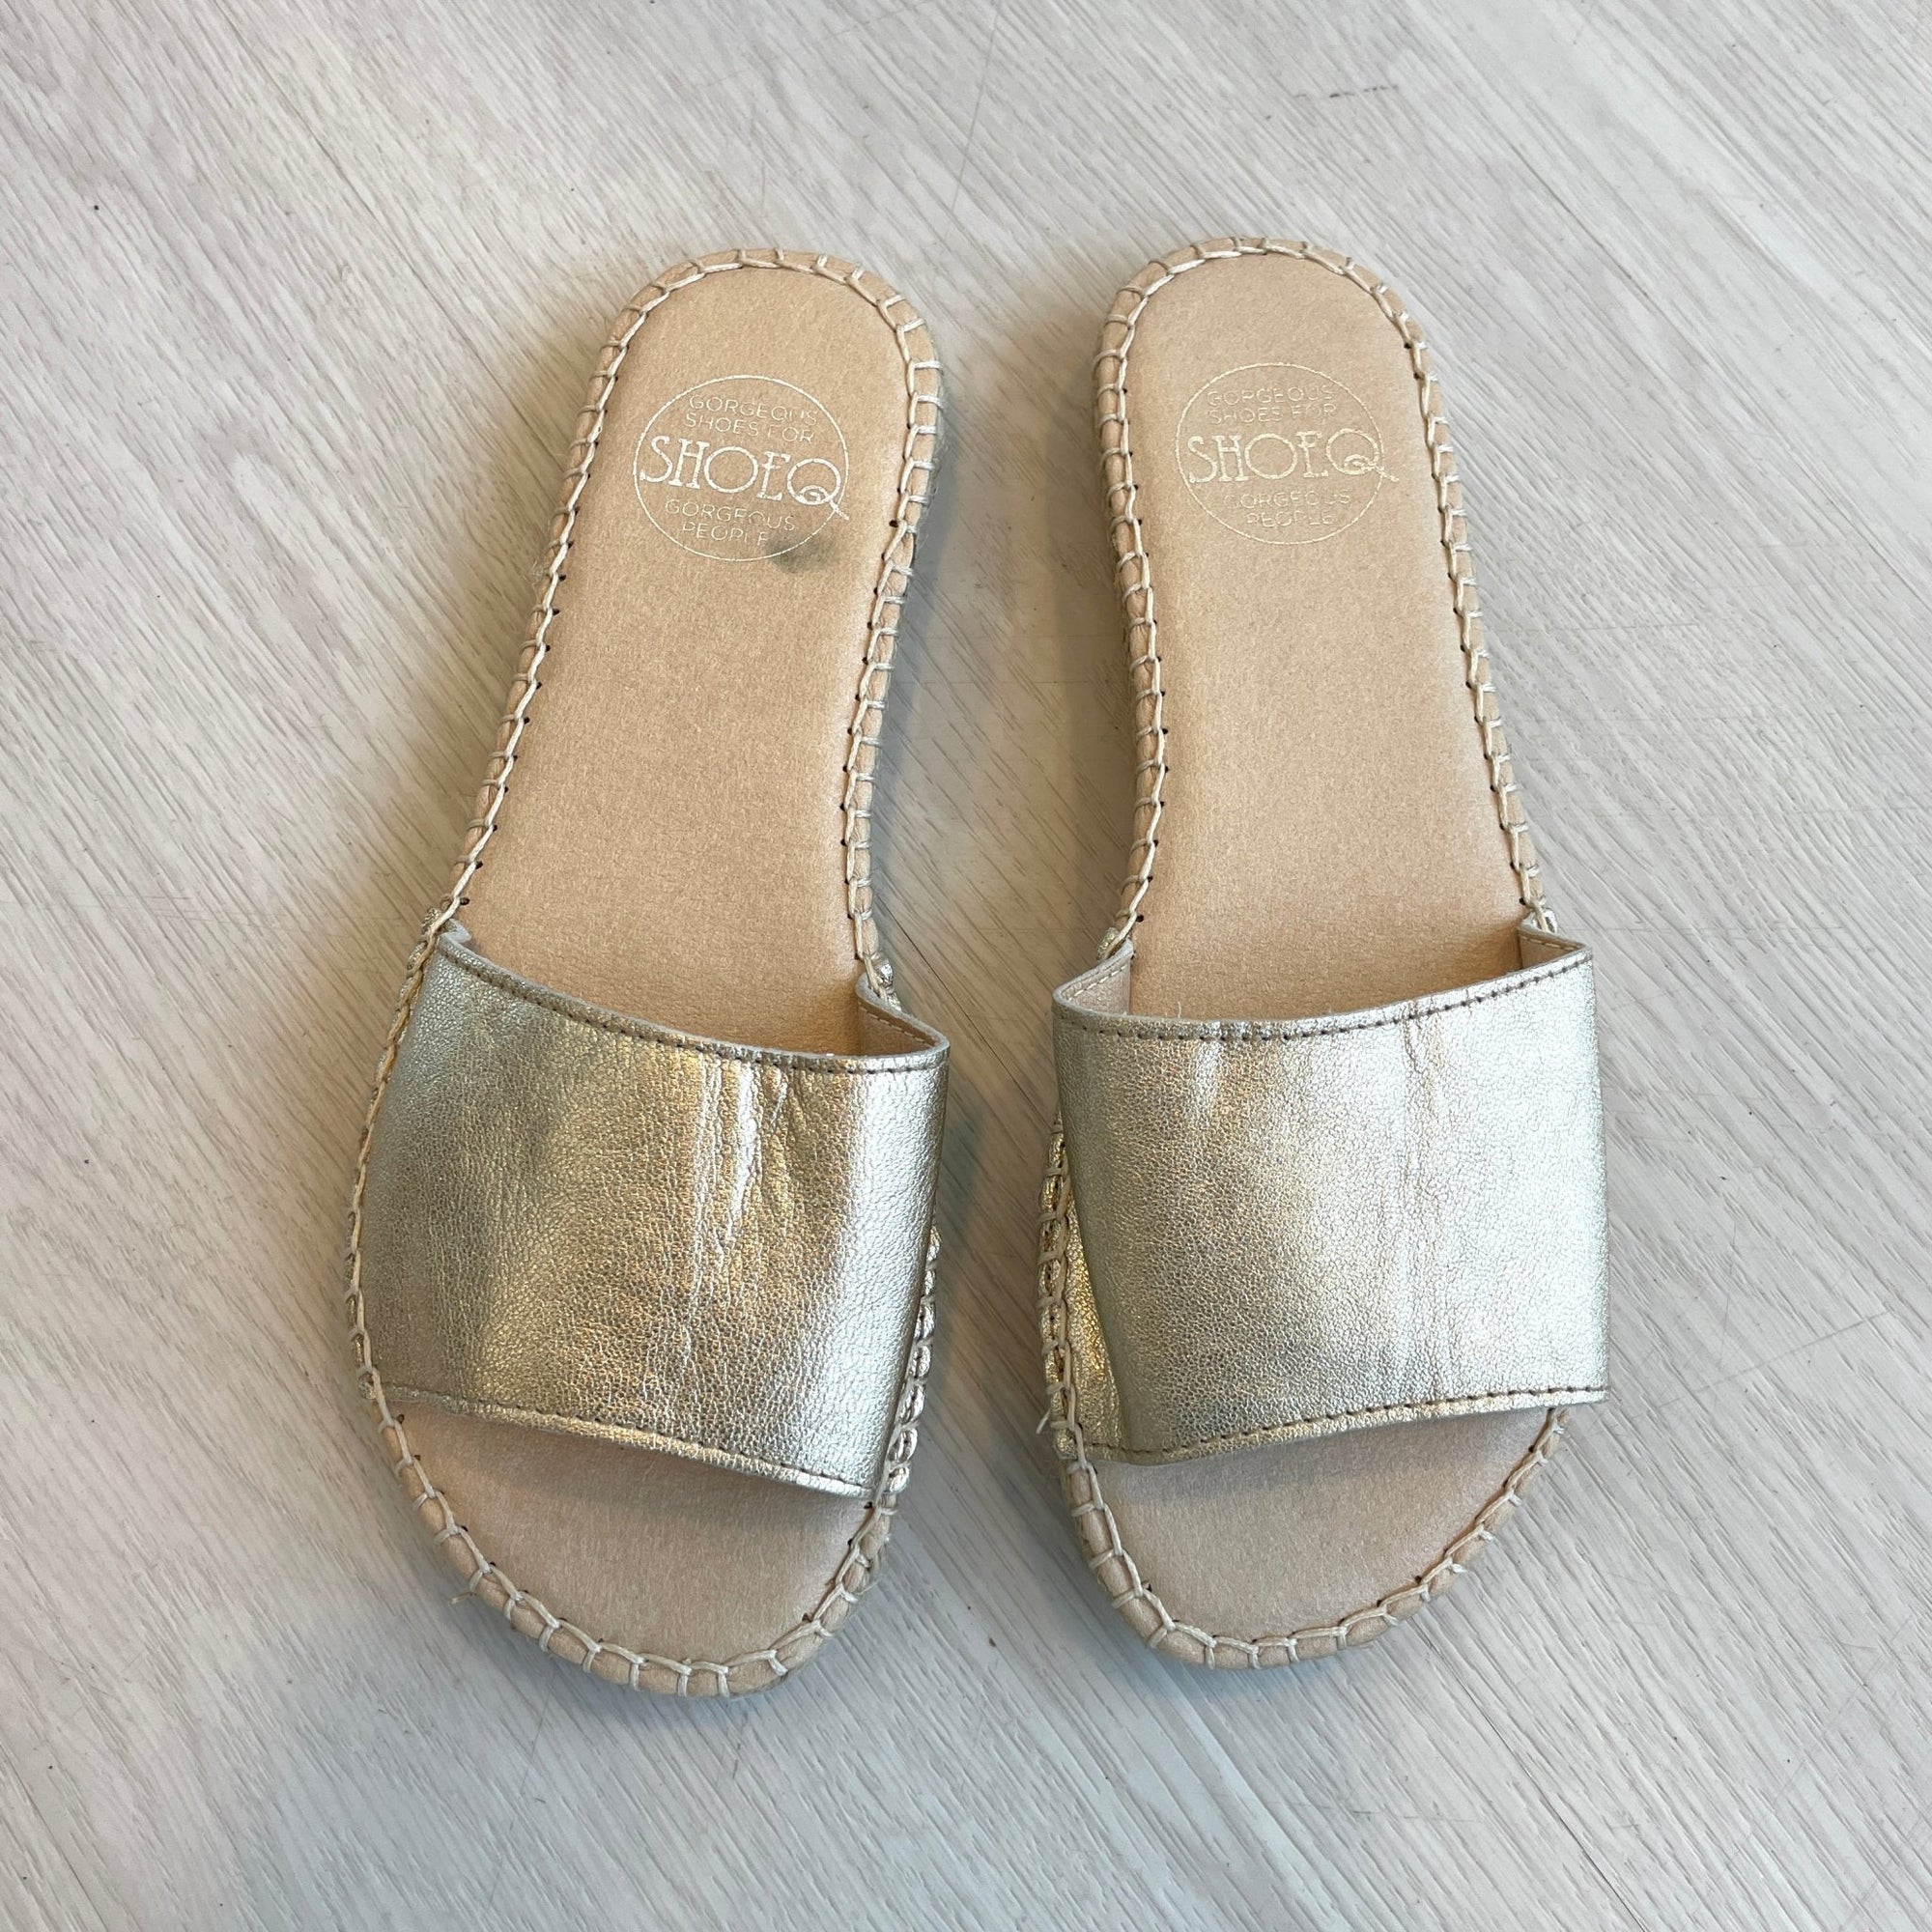 Summer Espadrille in Champagne Metallic - Outlet item - Shoeq